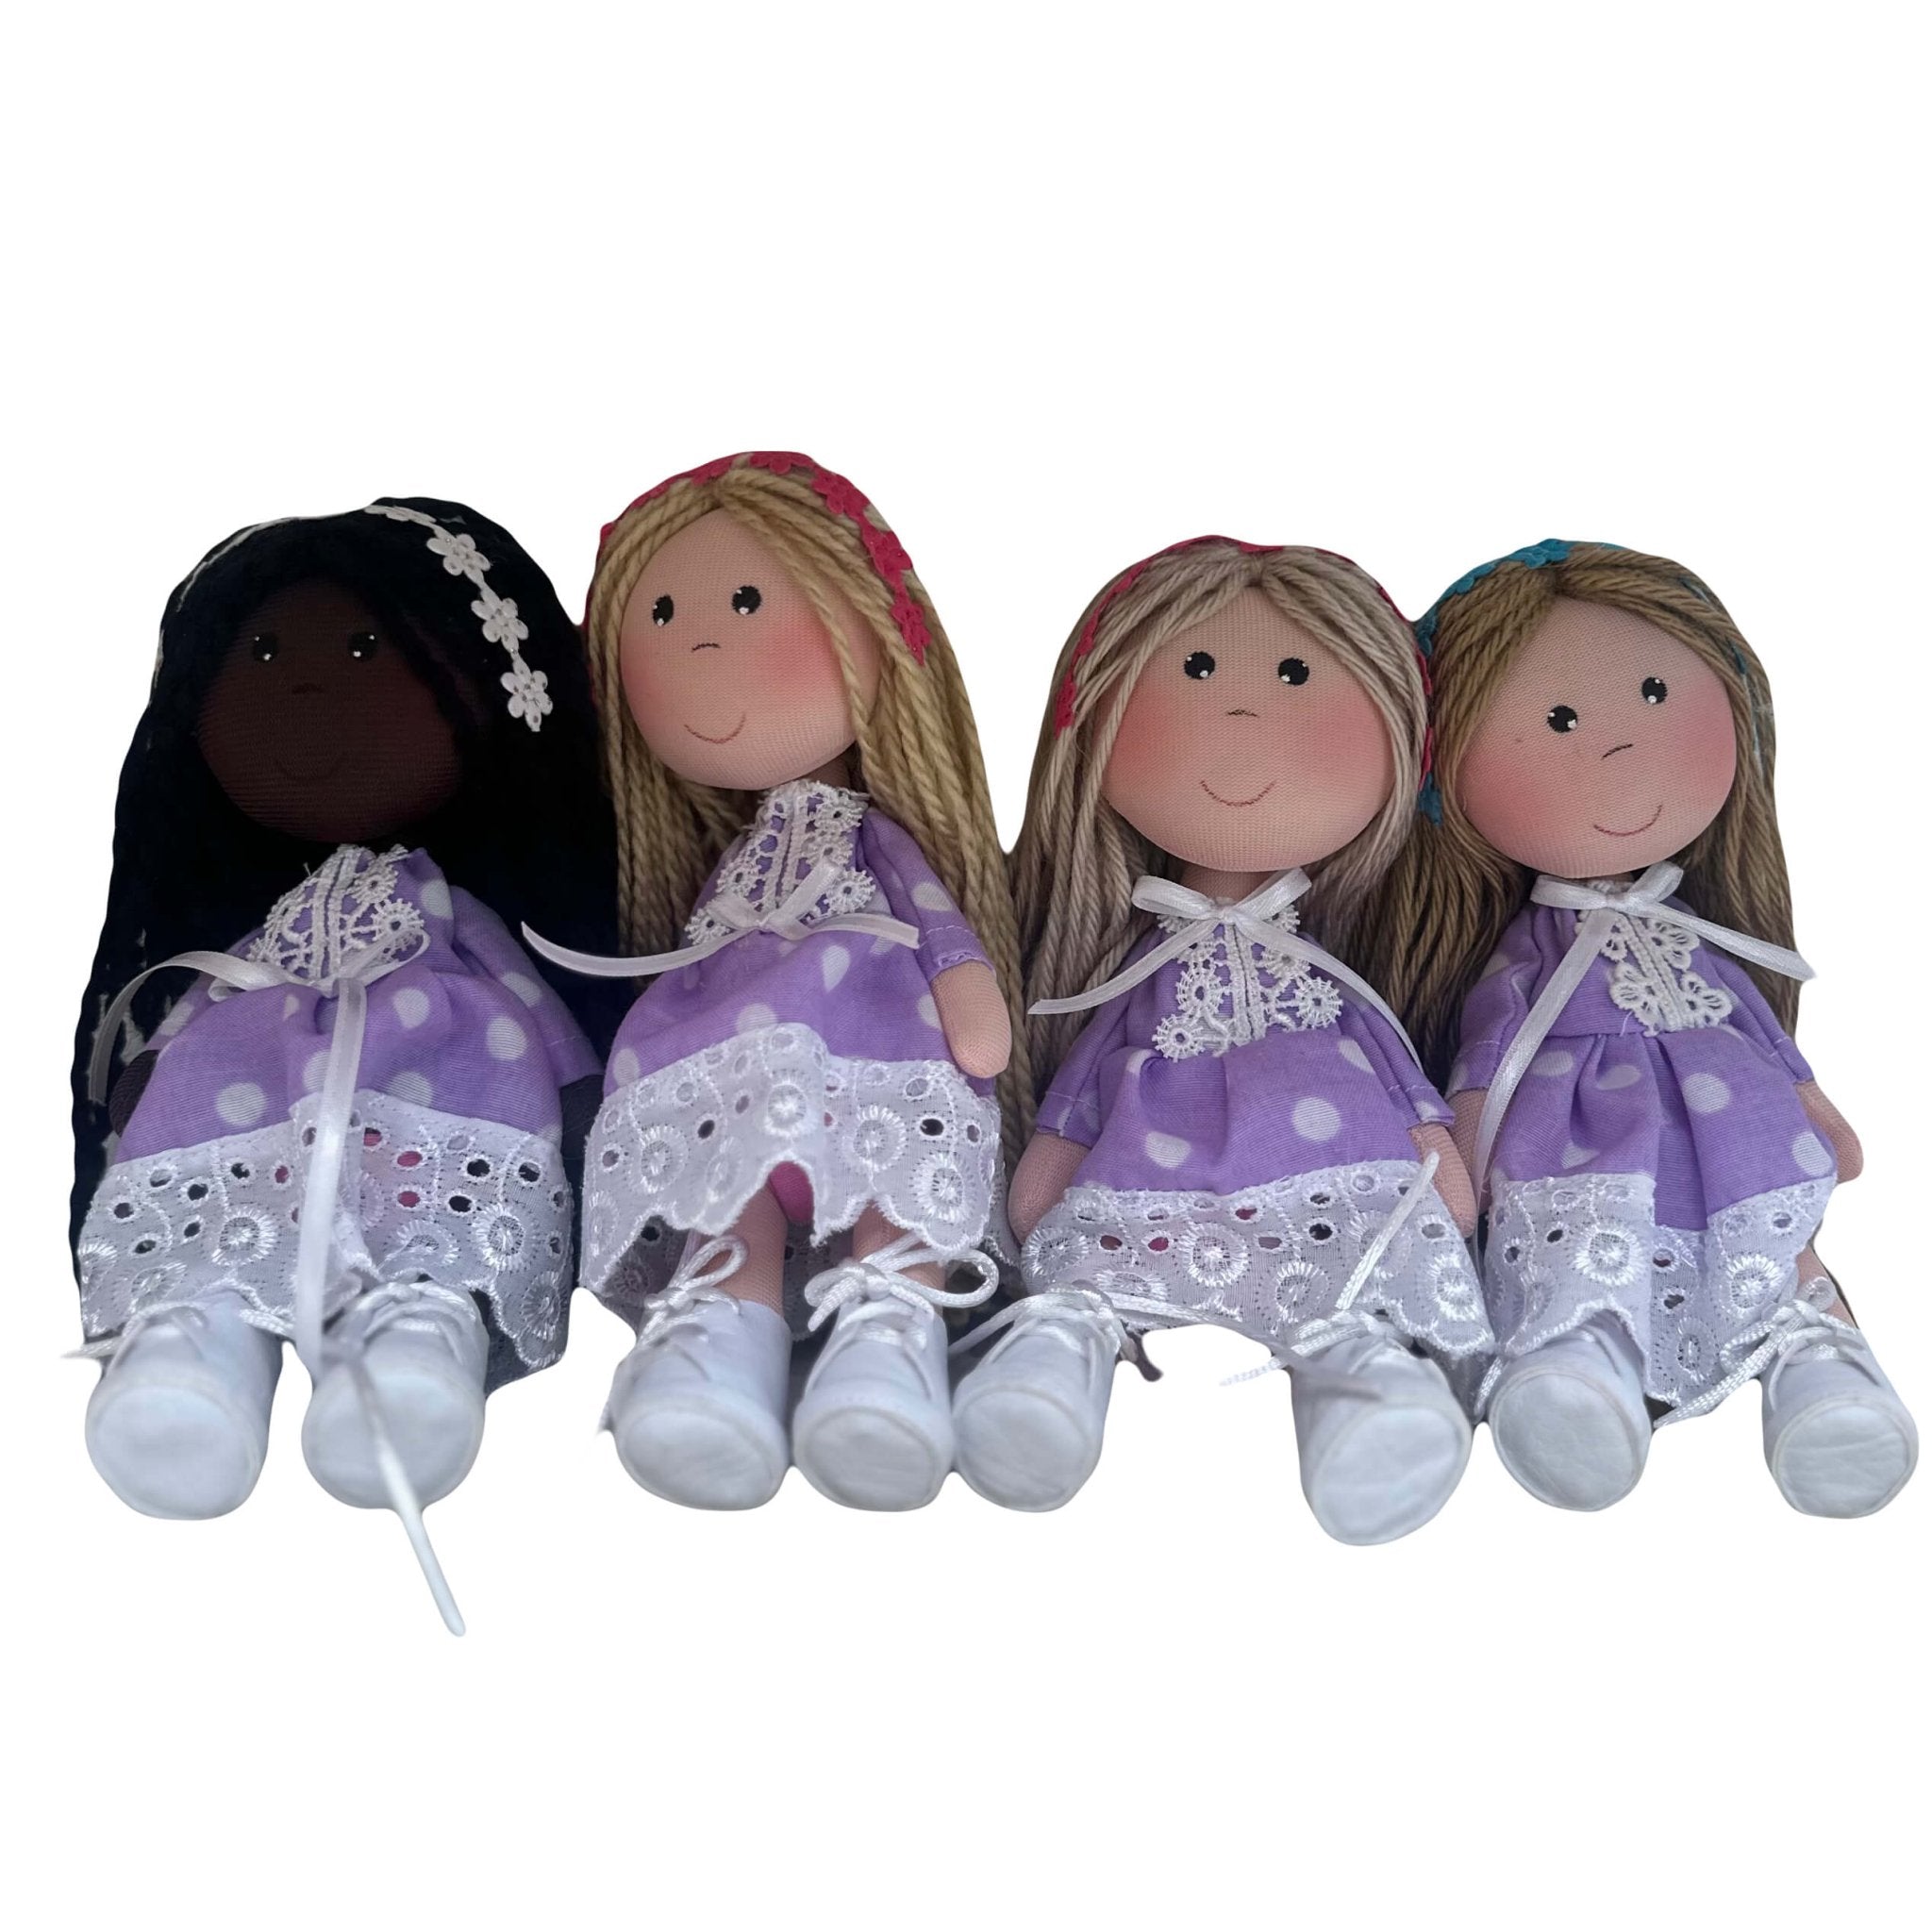 Cute rag dolls handmade in Colombia. There are 4 dolls wearing a purple polka dot dress with different skin and hair colors. They are also wearing flower headbands.